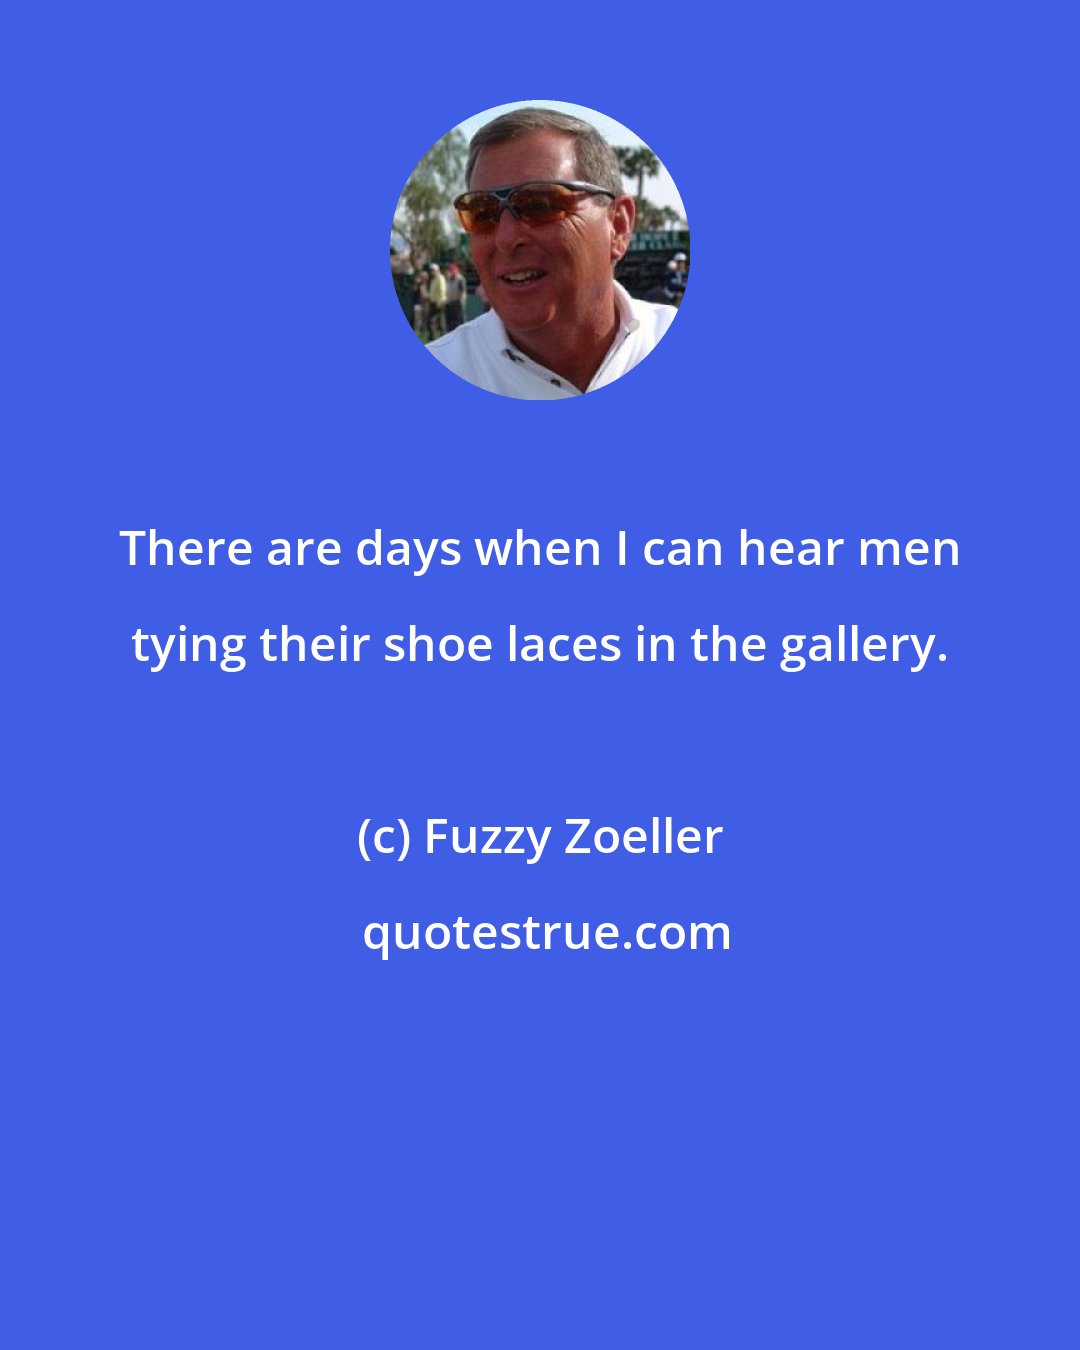 Fuzzy Zoeller: There are days when I can hear men tying their shoe laces in the gallery.